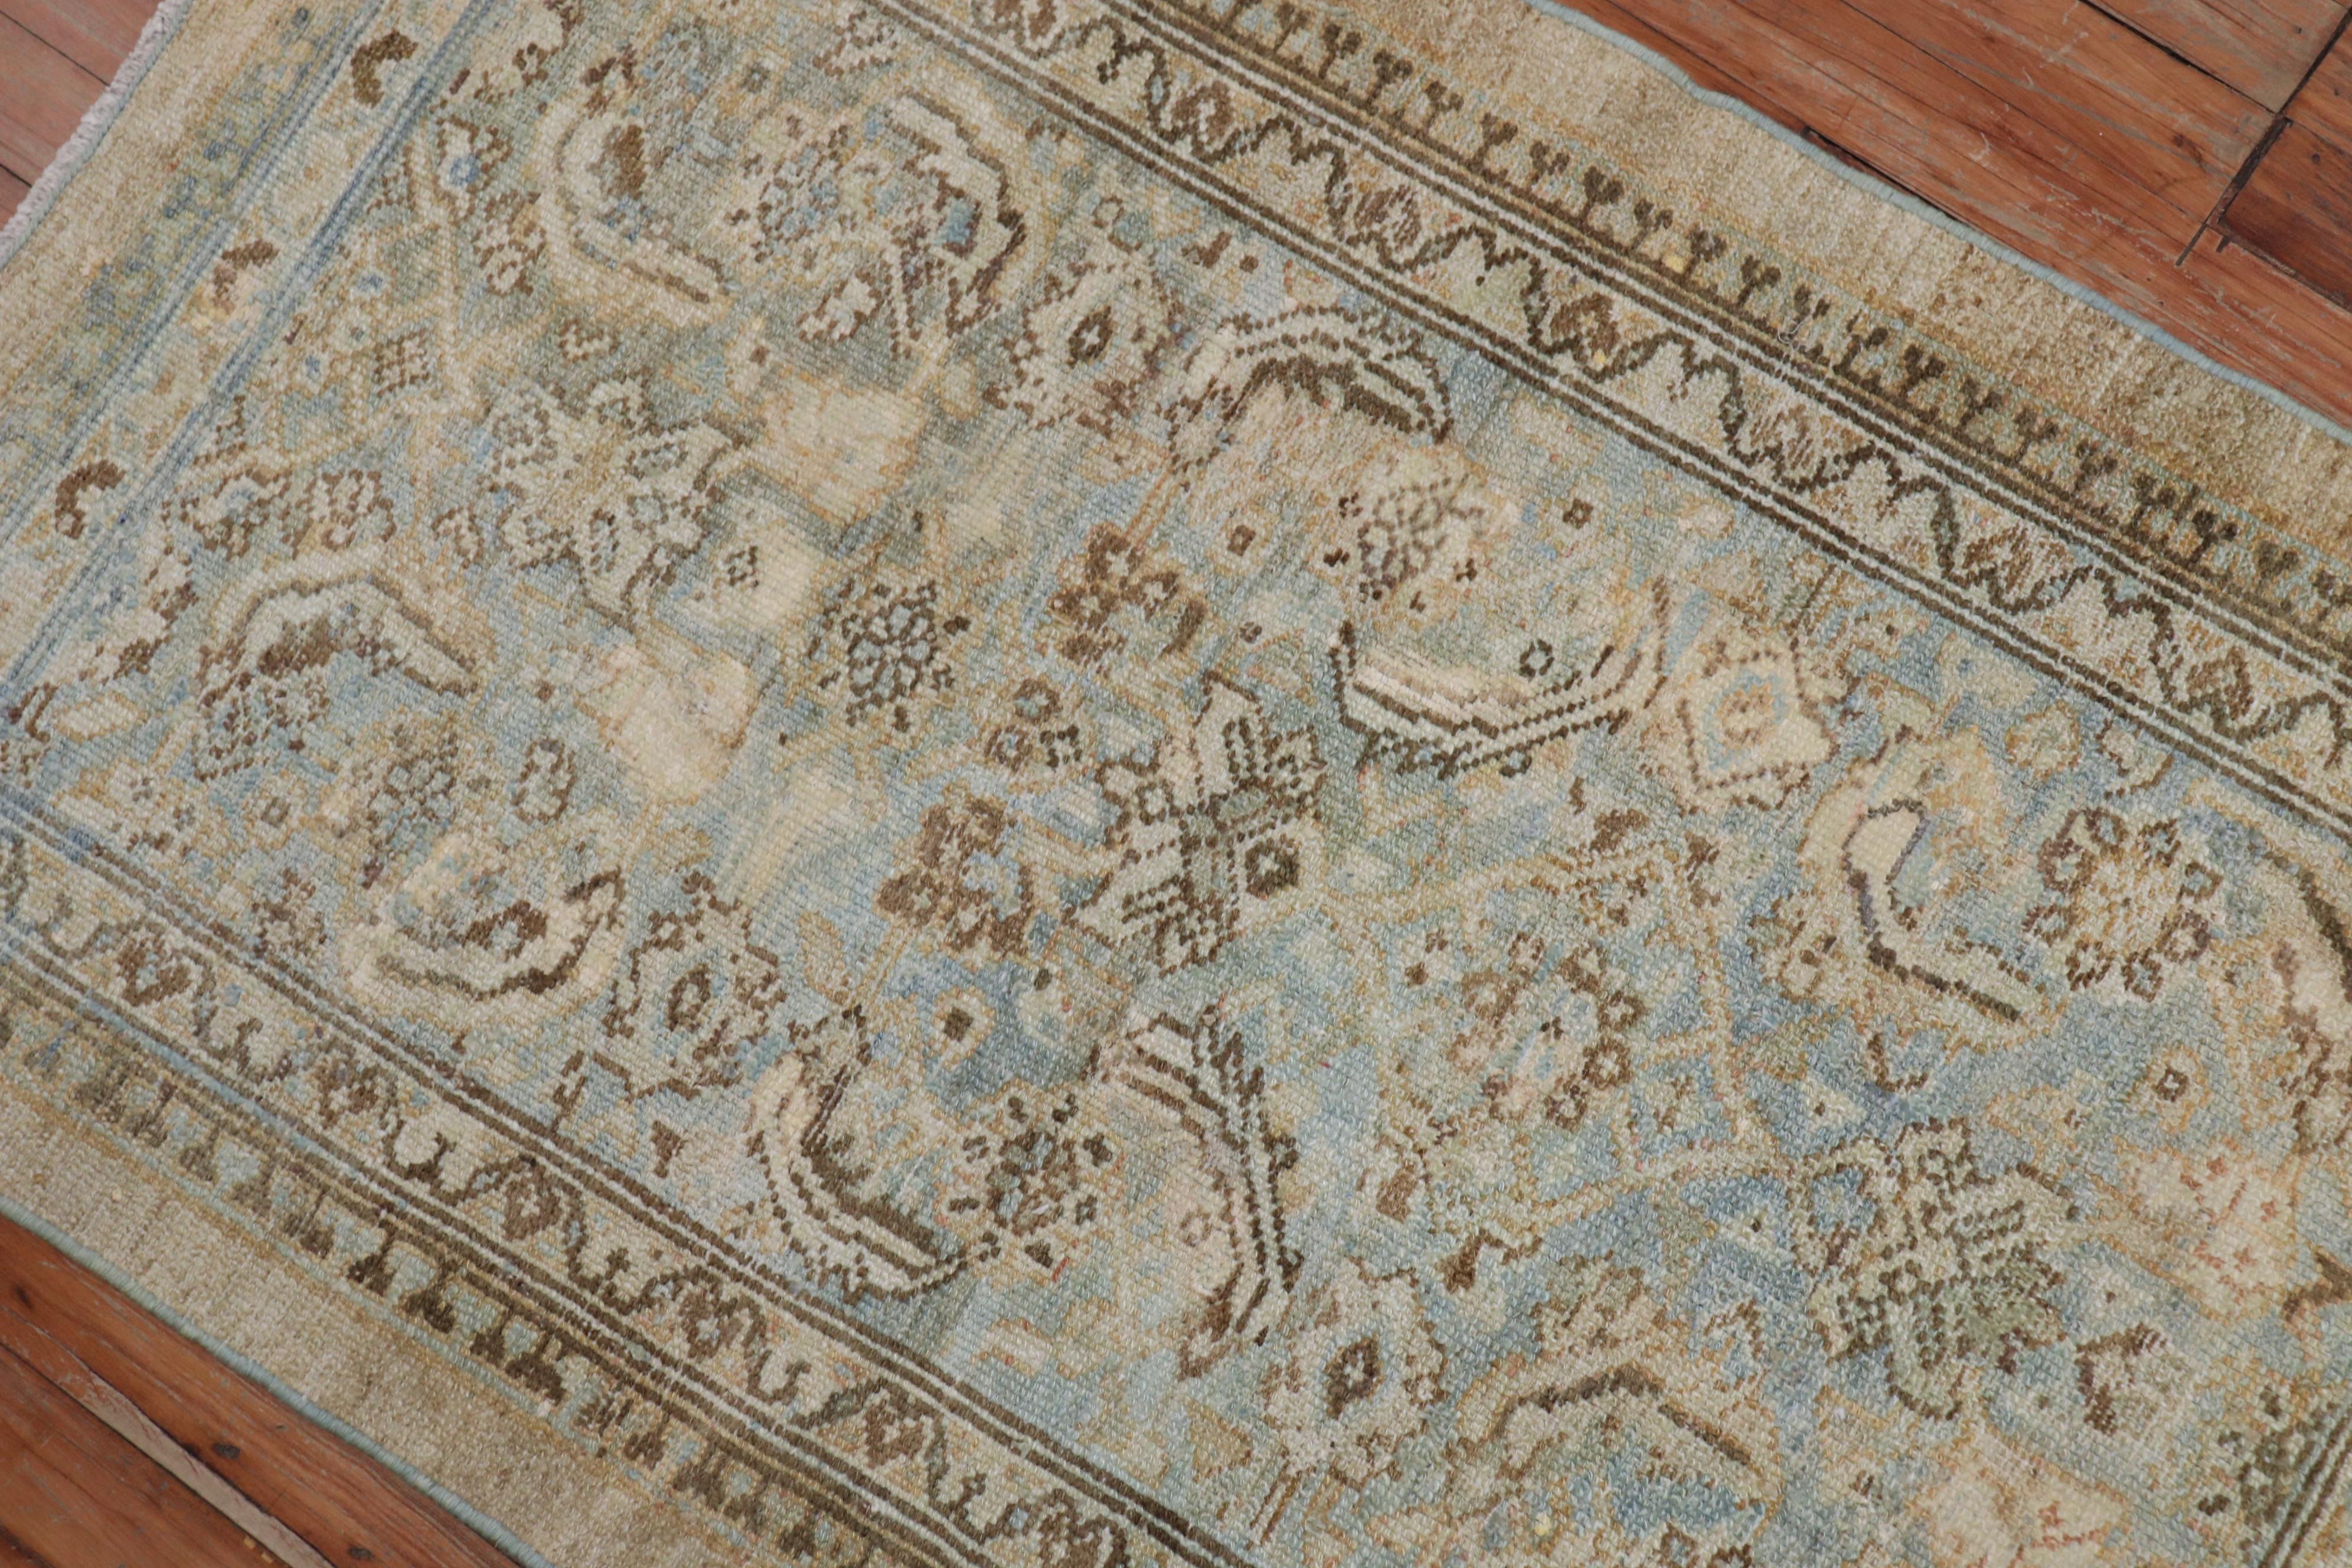 An early 20th century traditional Persian Serab mat in powder blue and camel accents.

Measures: 2'7